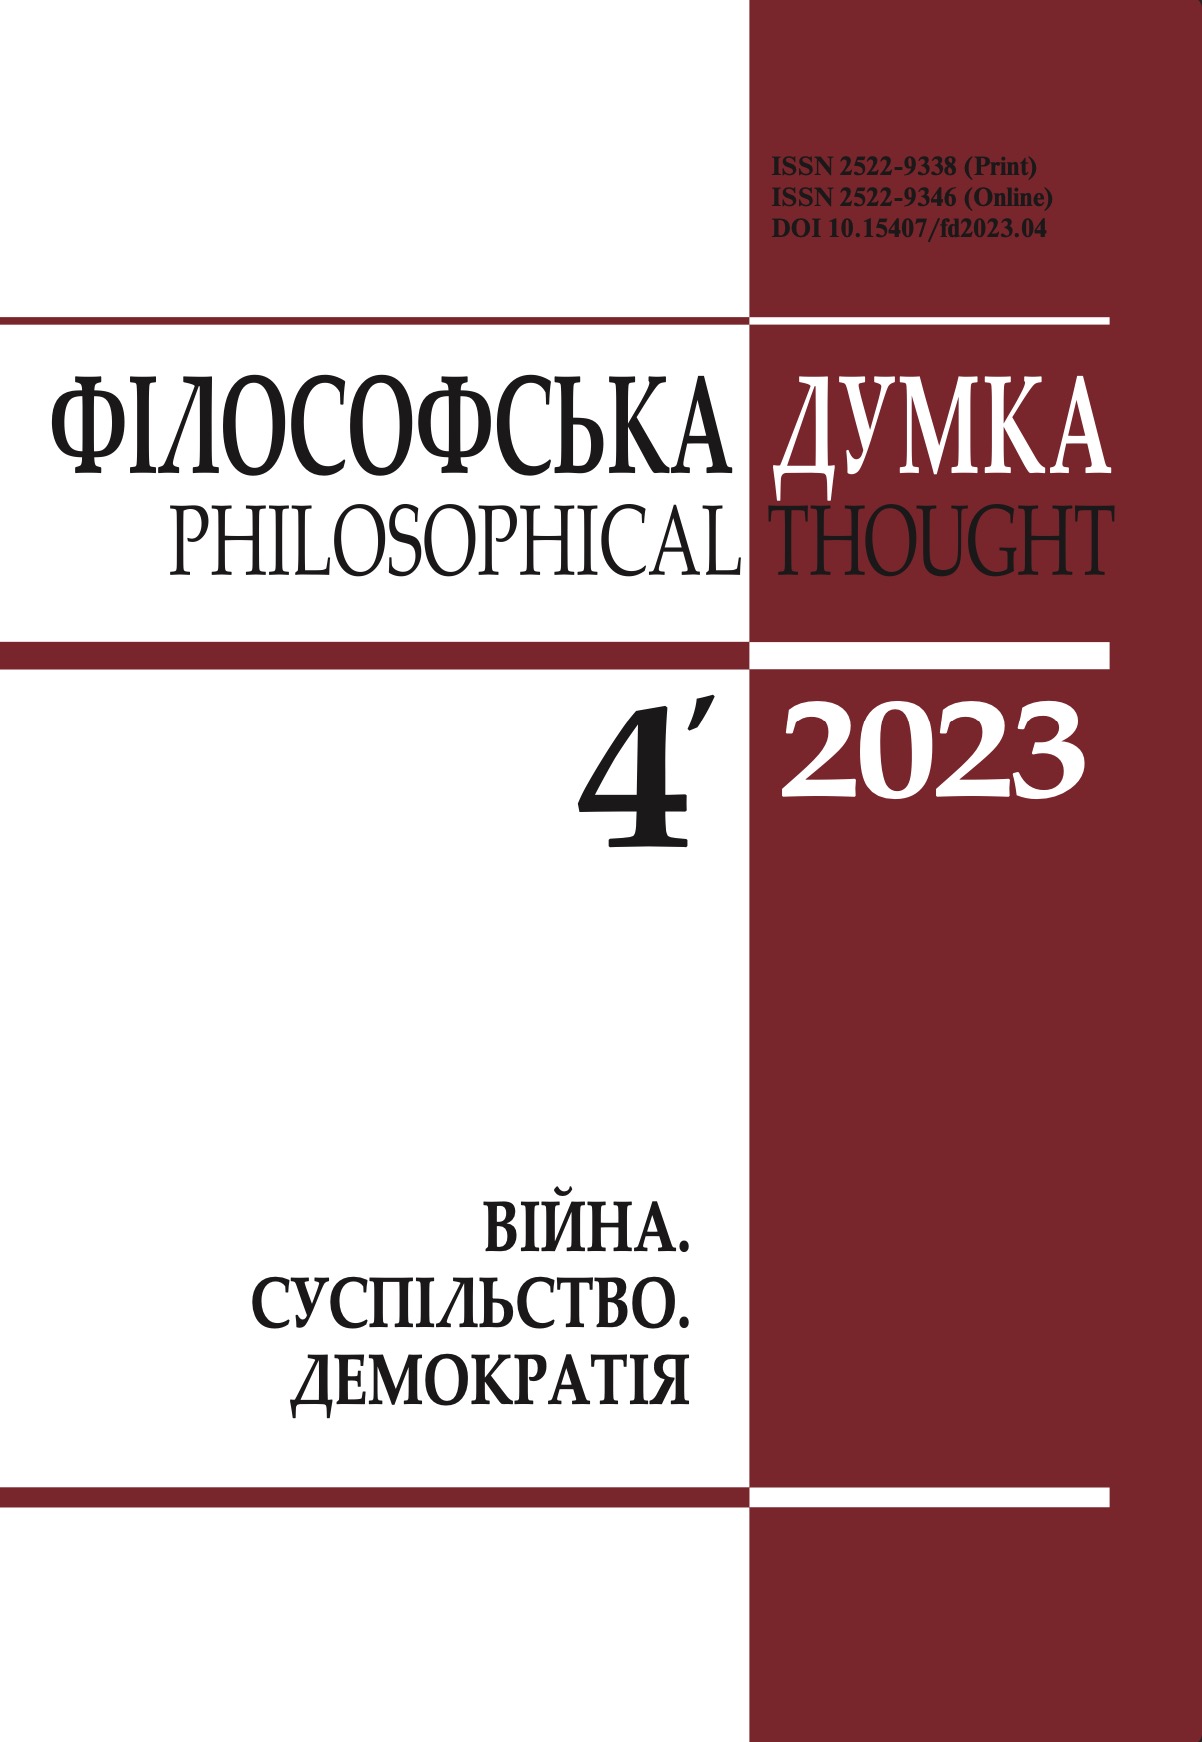 					View No. 4 (2023): Philosophical thought
				